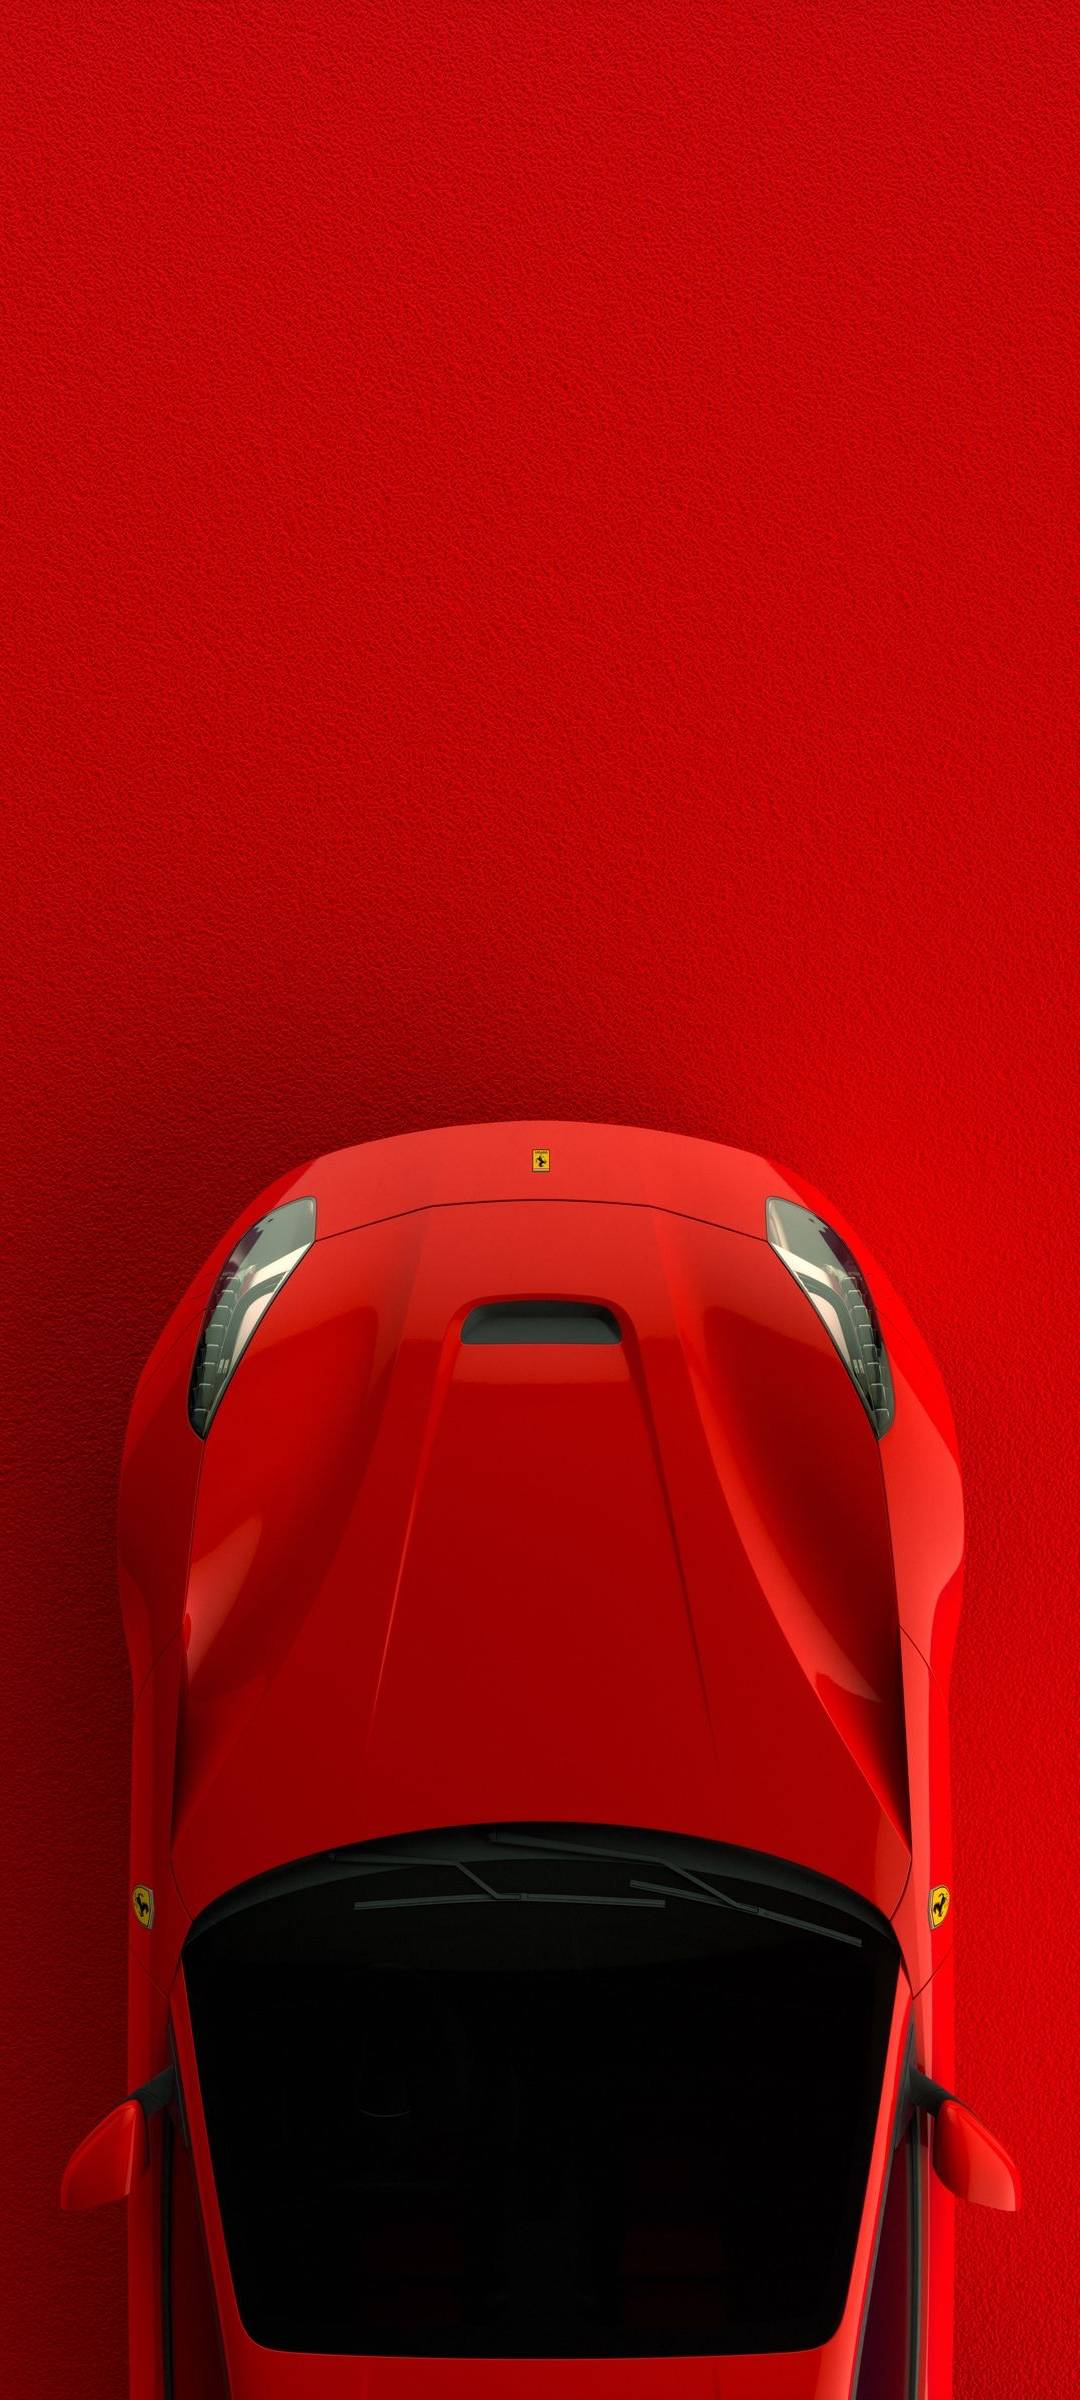 Details More Than Red Car Wallpaper Latest In Cdgdbentre